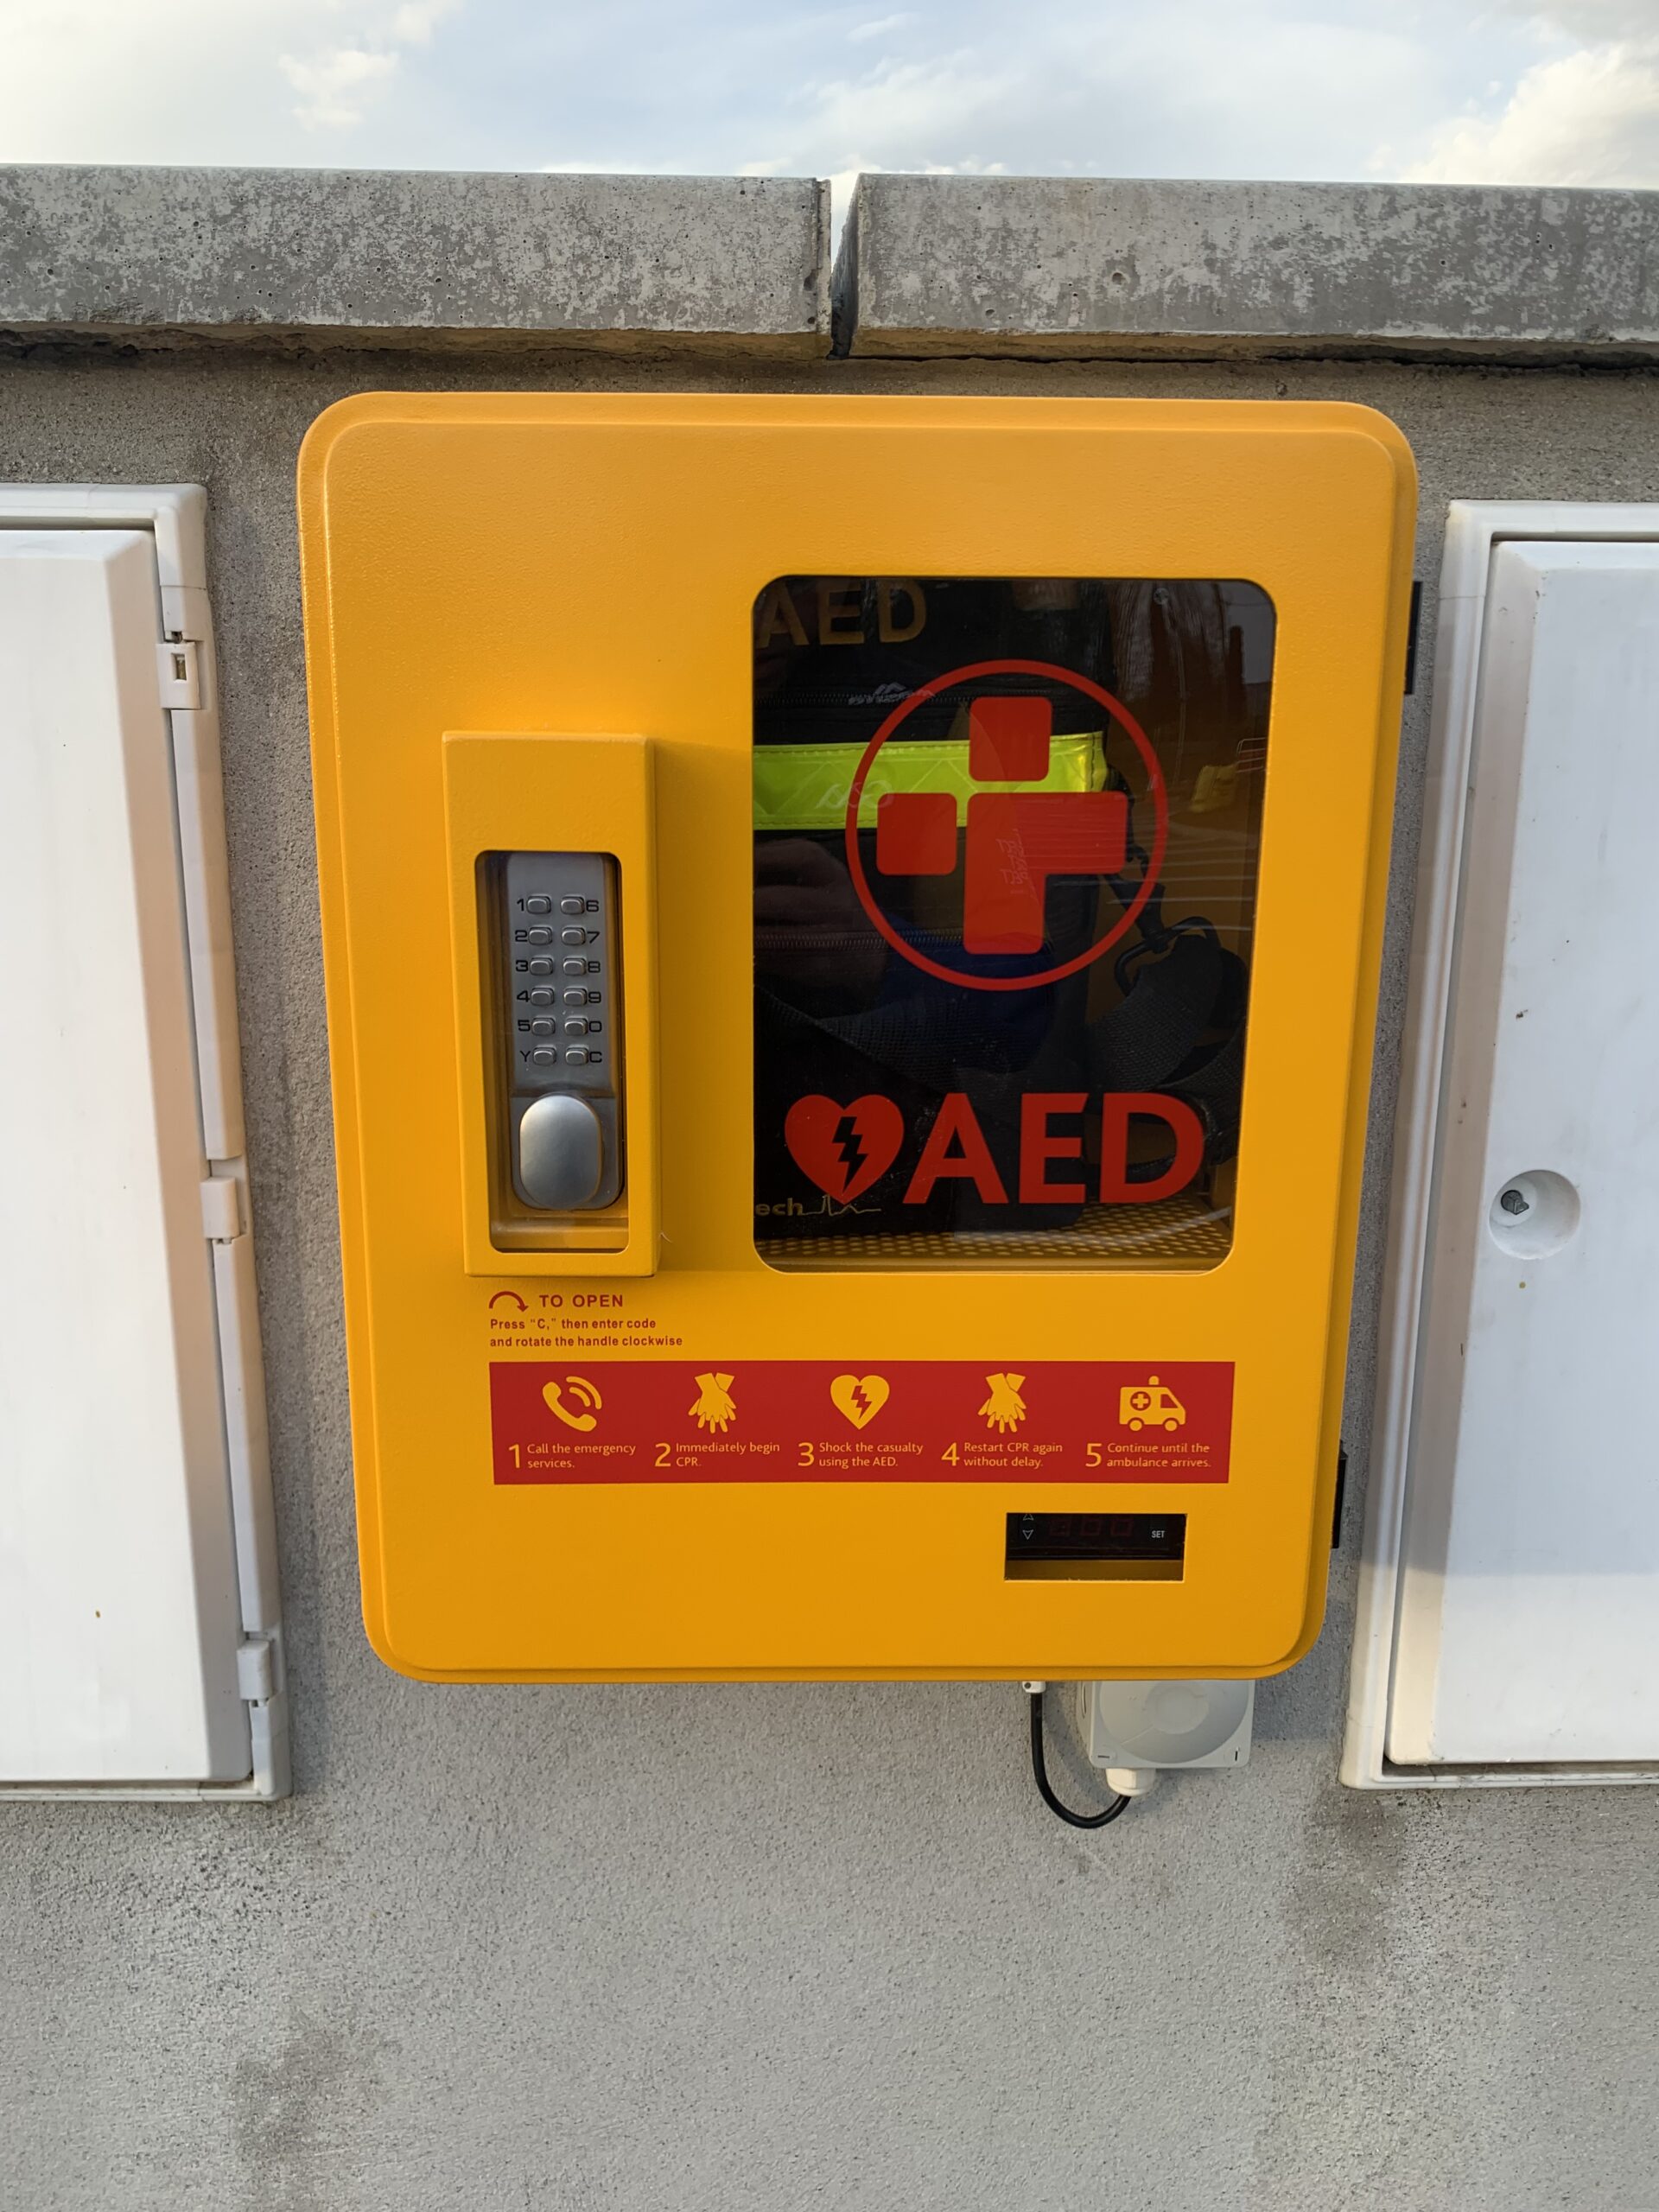 Club Defibrillator now available to the Public…